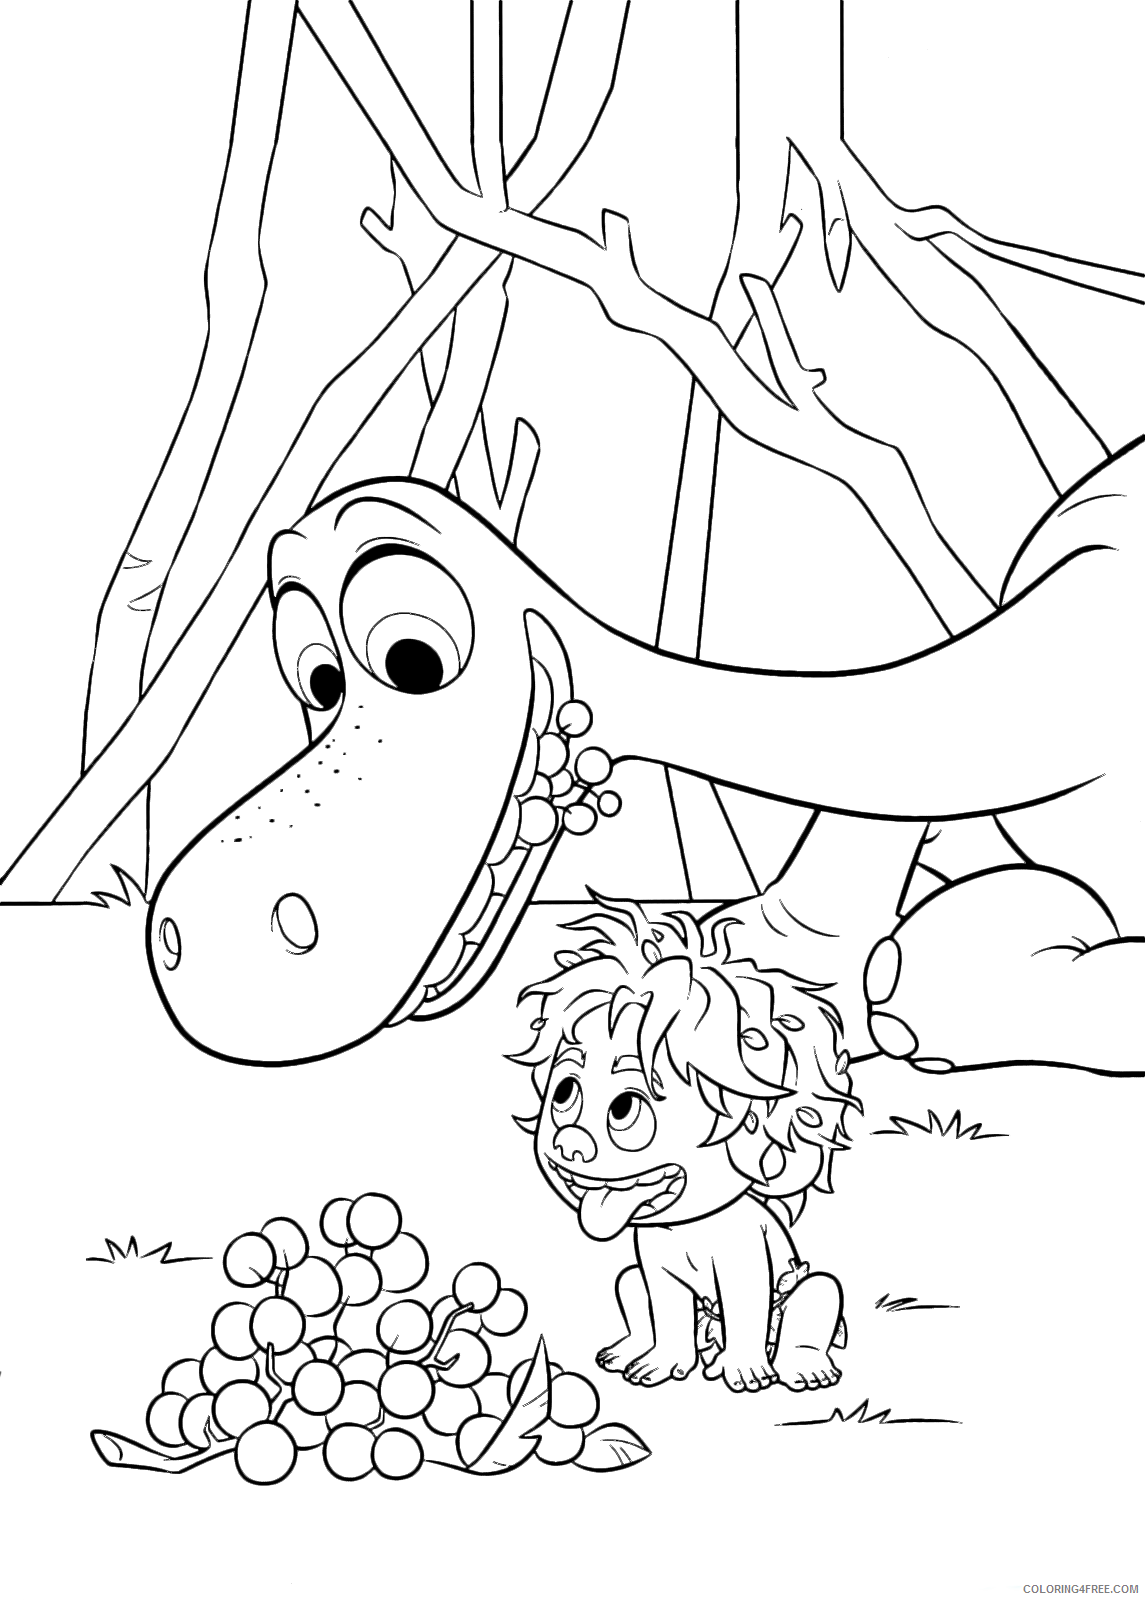 The Good Dinosaur Coloring Pages Tv Film Spot And Arlo Eat Berries 2020 08820 Coloring4free Coloring4free Com - roblox banana eats coloring pages